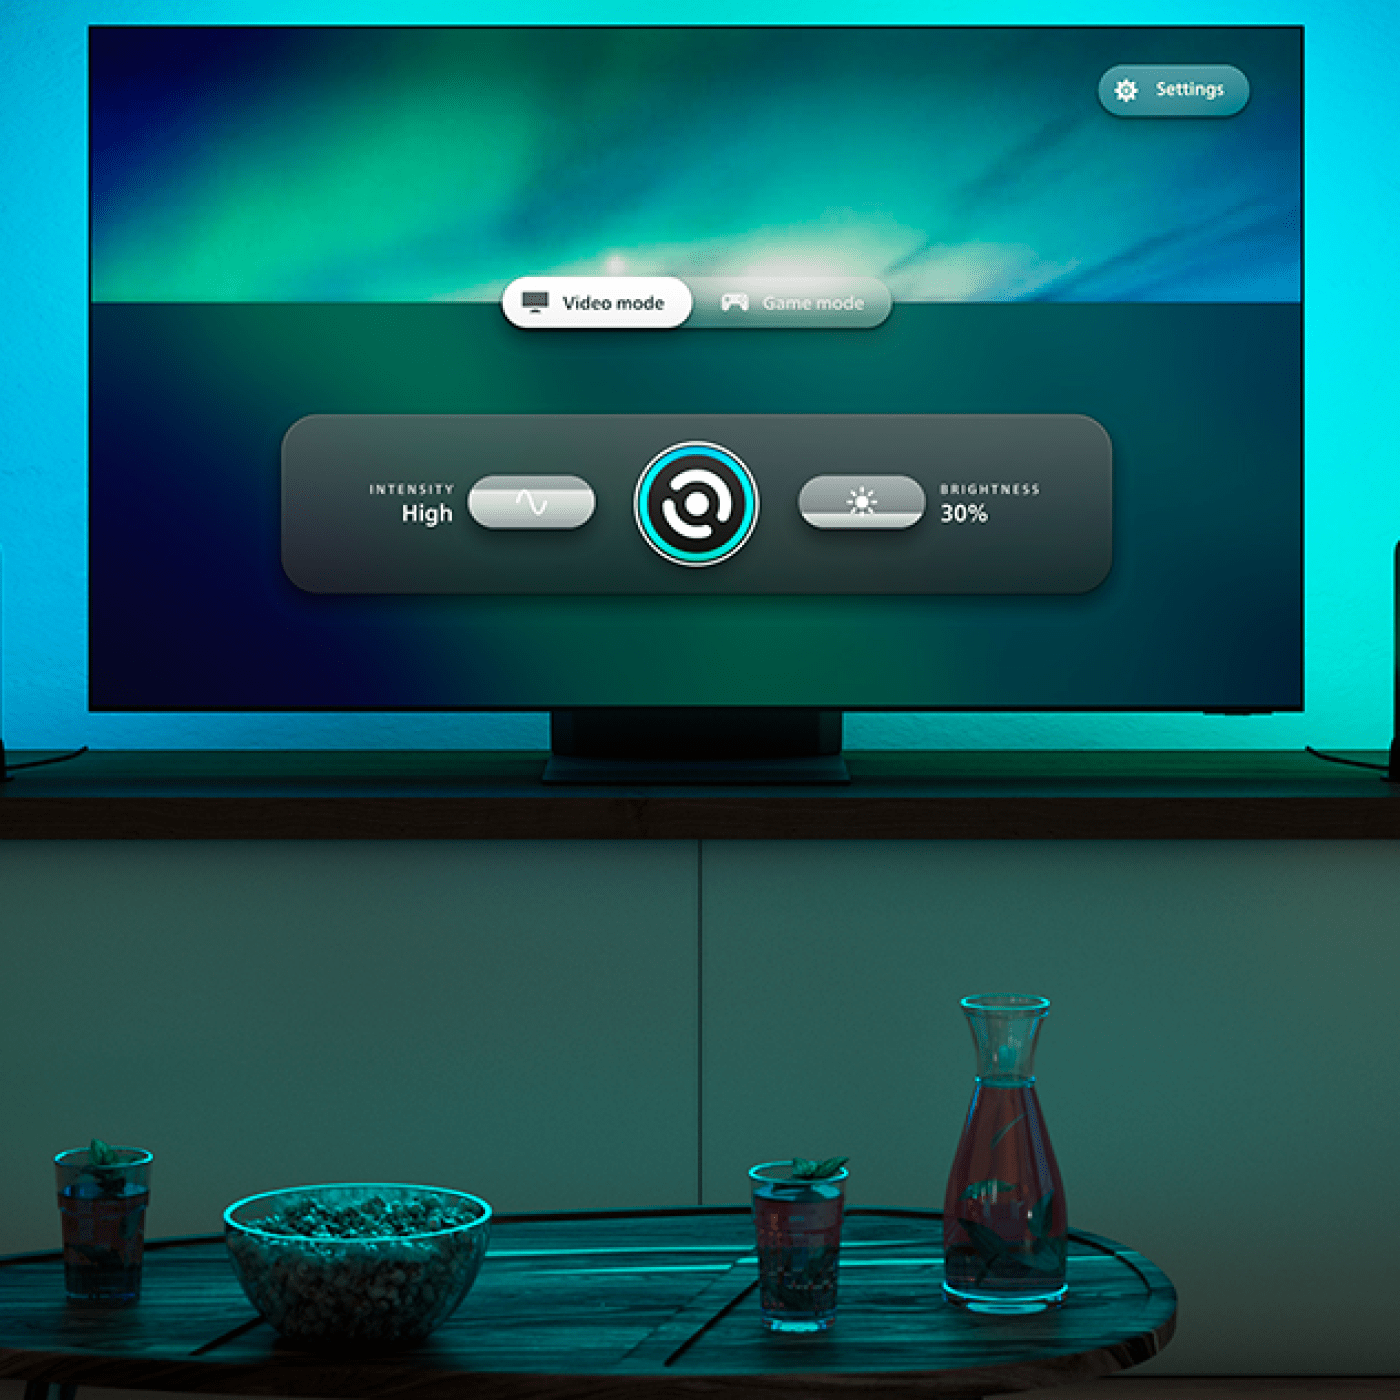 Philips Hue is launching a TV app for $130